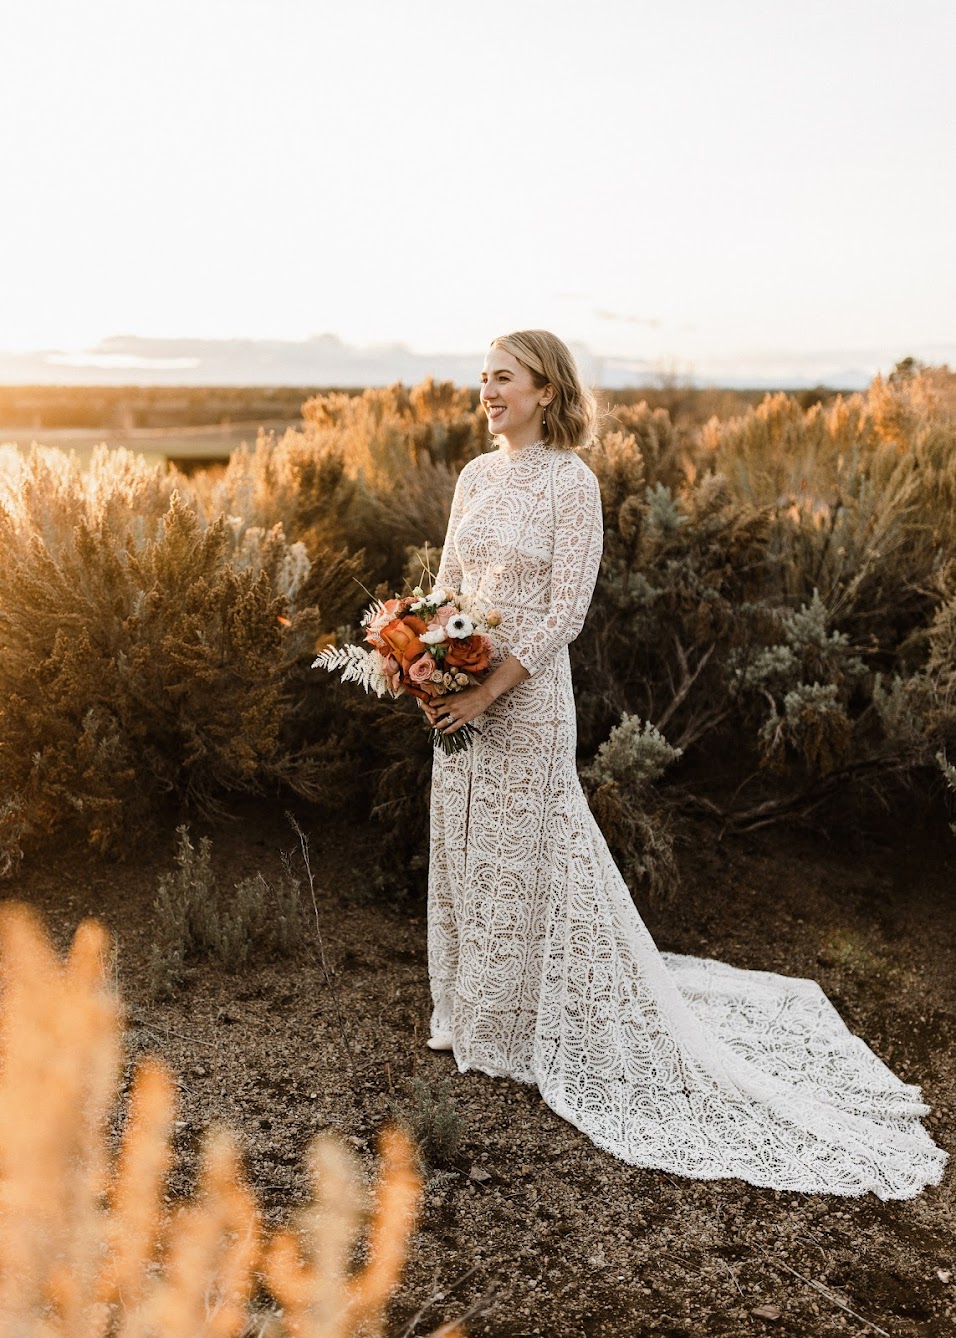 the bride staring out into the field with a big smile on, as she hold her floral bouquet and the sun is setting behind her. 